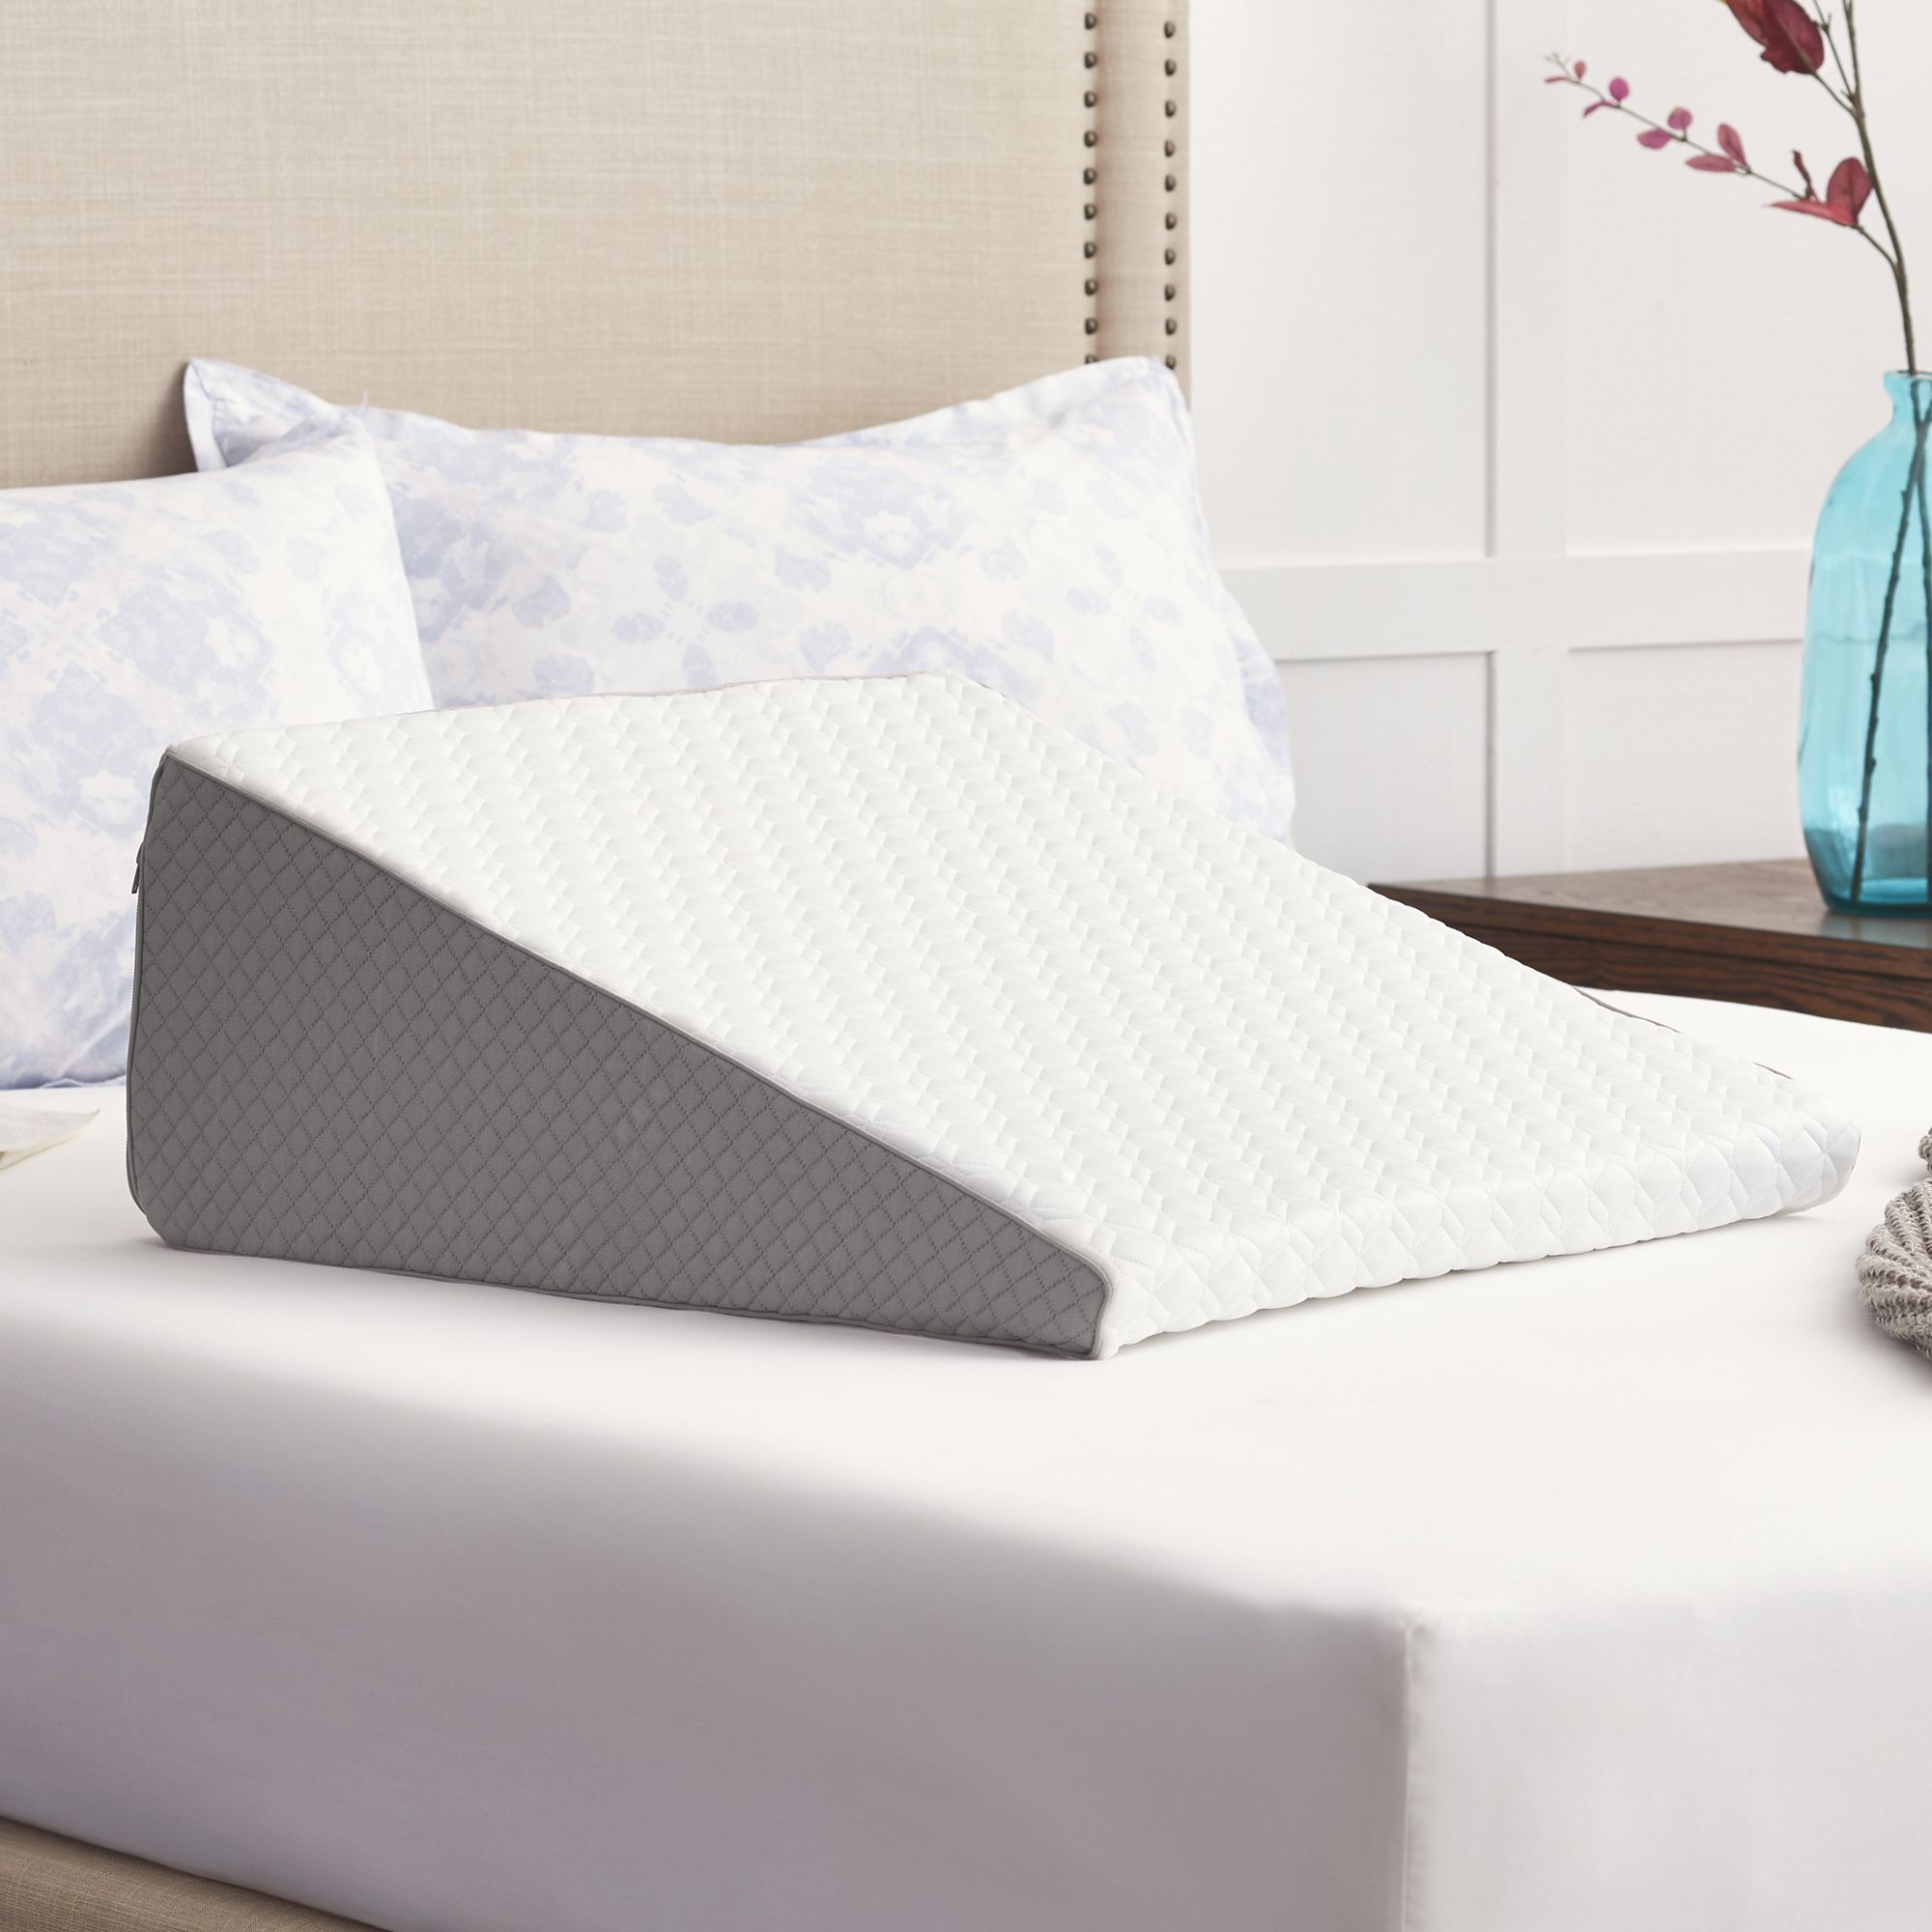 Bed Buddy Wedge Pillows